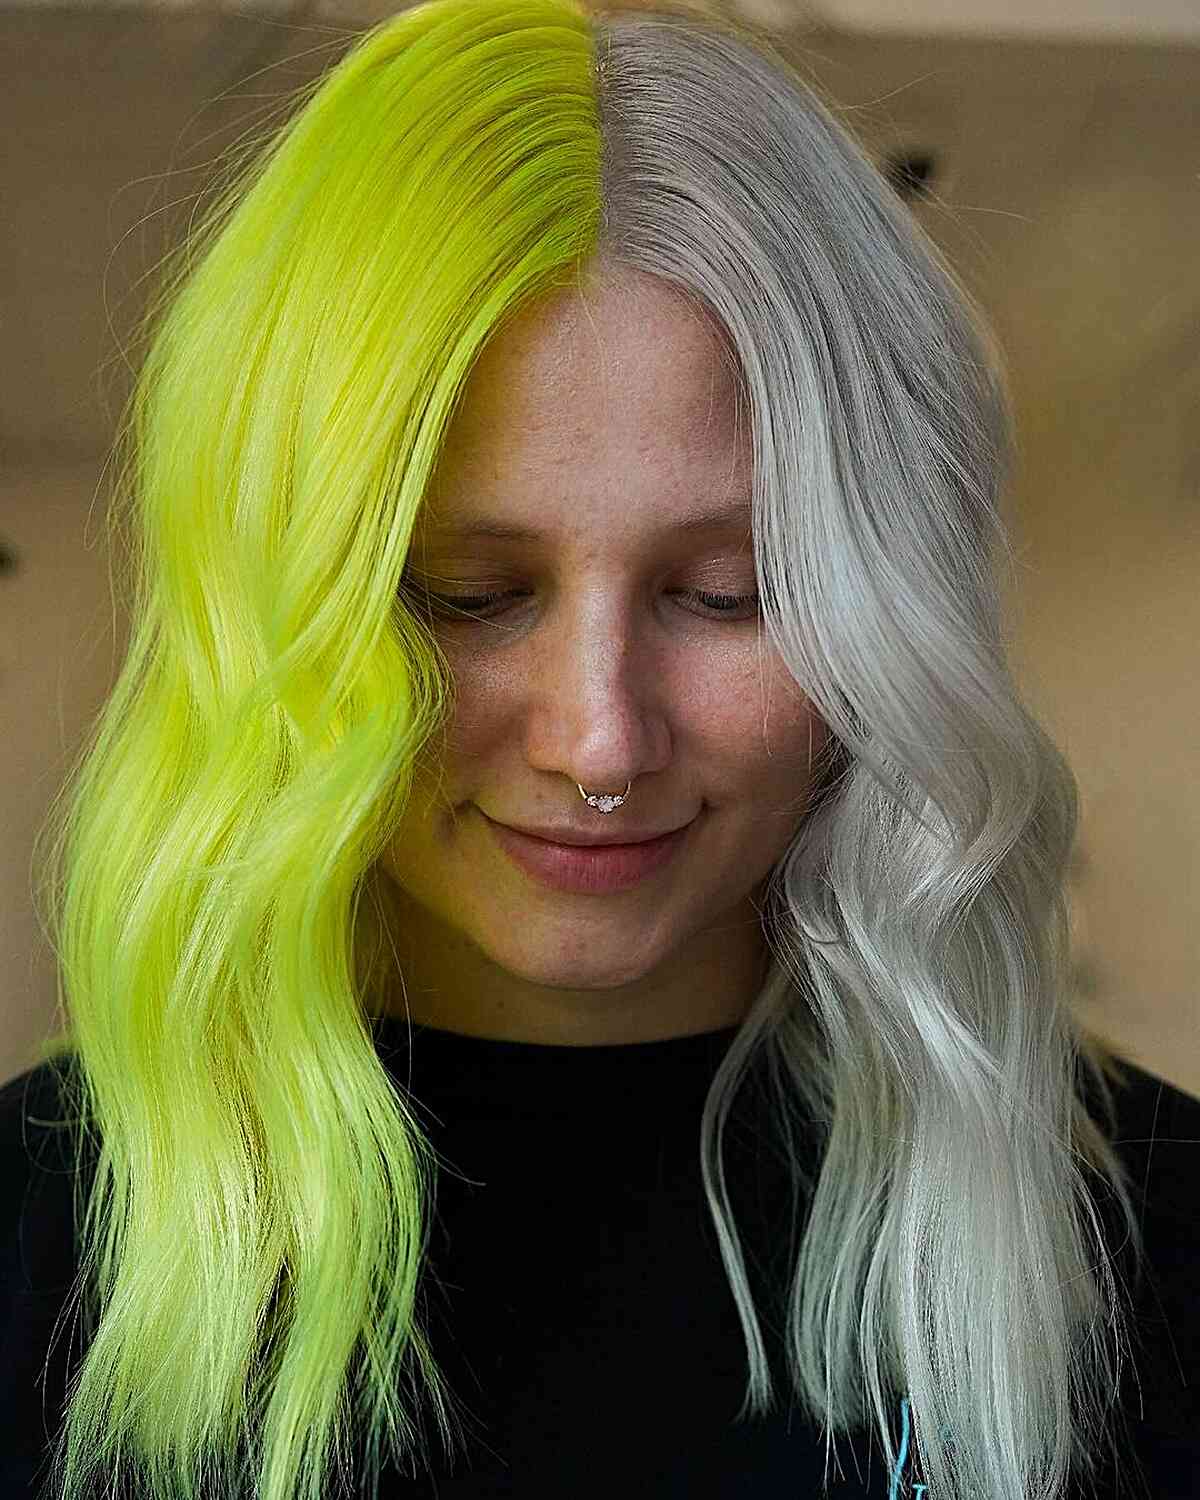 Yellow and Silver Blonde Middle-Parted Split Dyed Hair